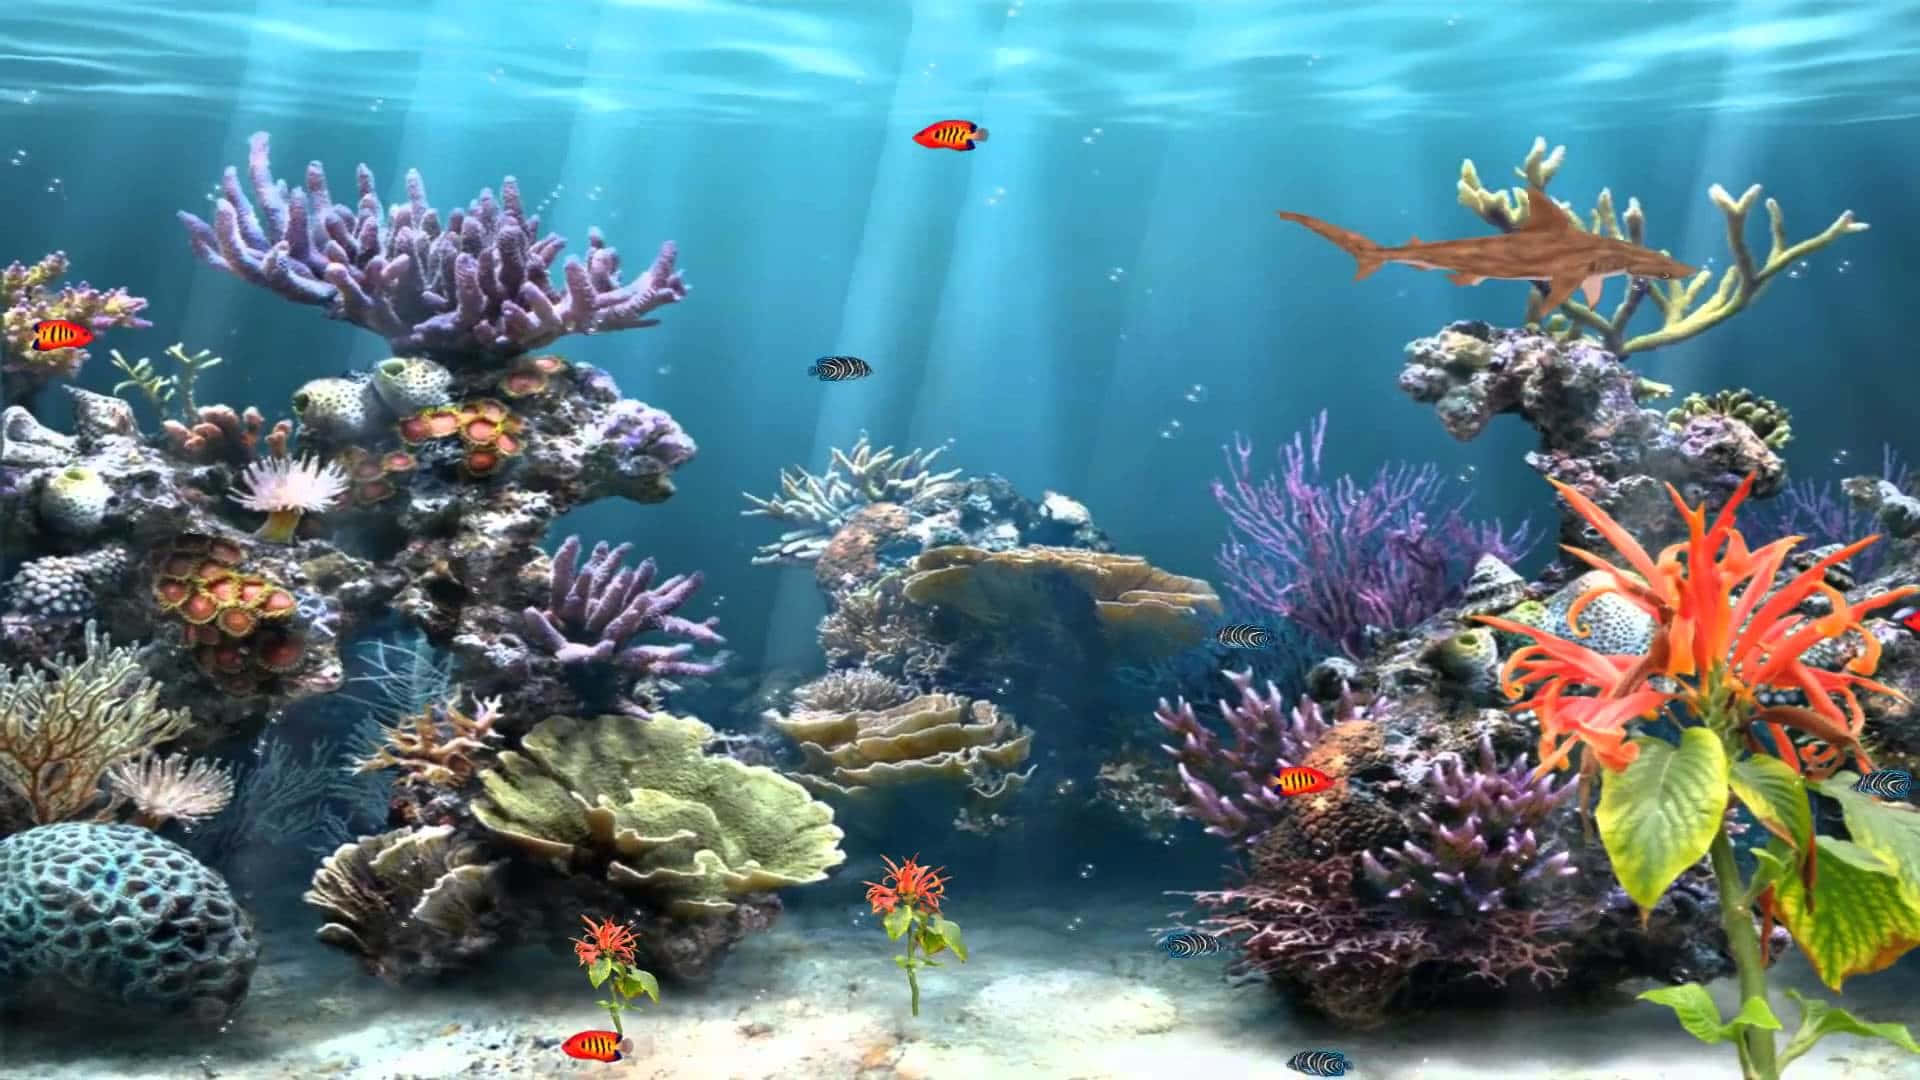  Beautiful coral and aquatic ecosystems